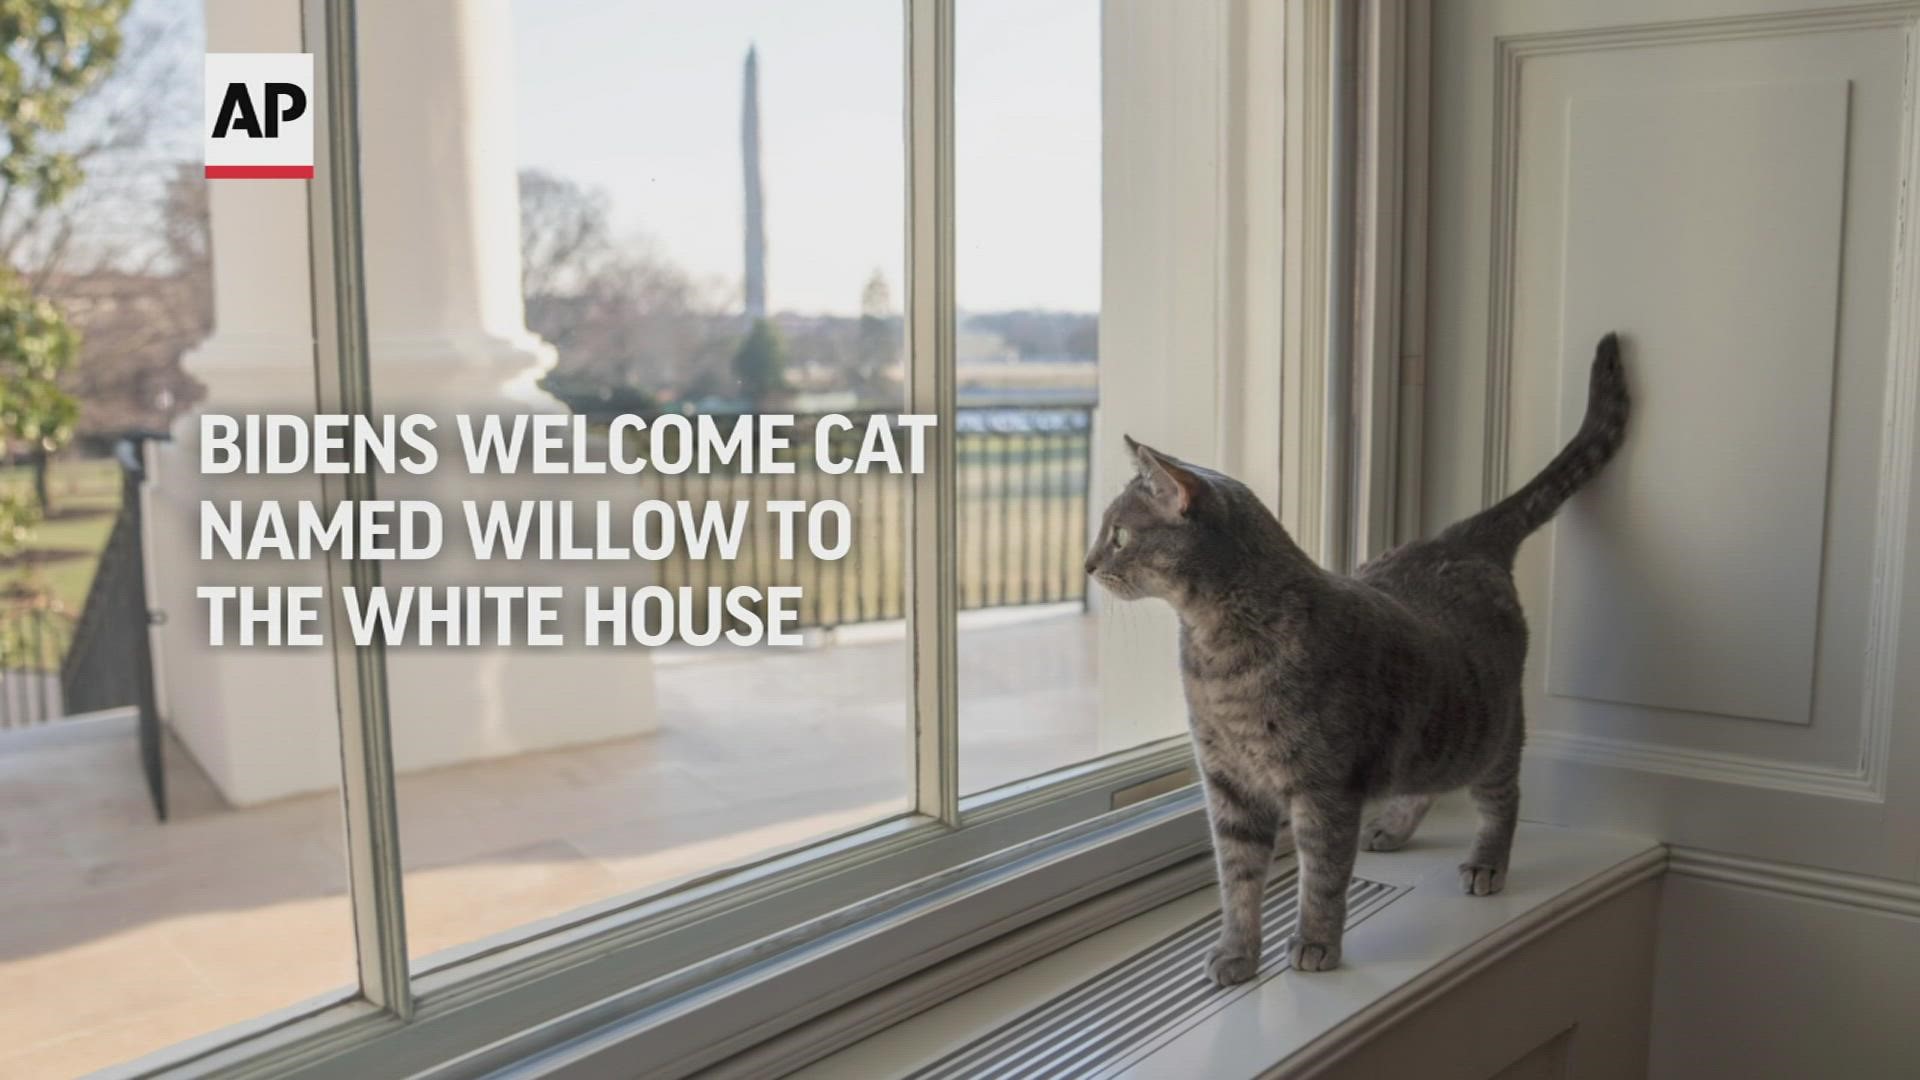 President Joe Biden and first lady Jill Biden have finally added the long-promised cat to their pet family.